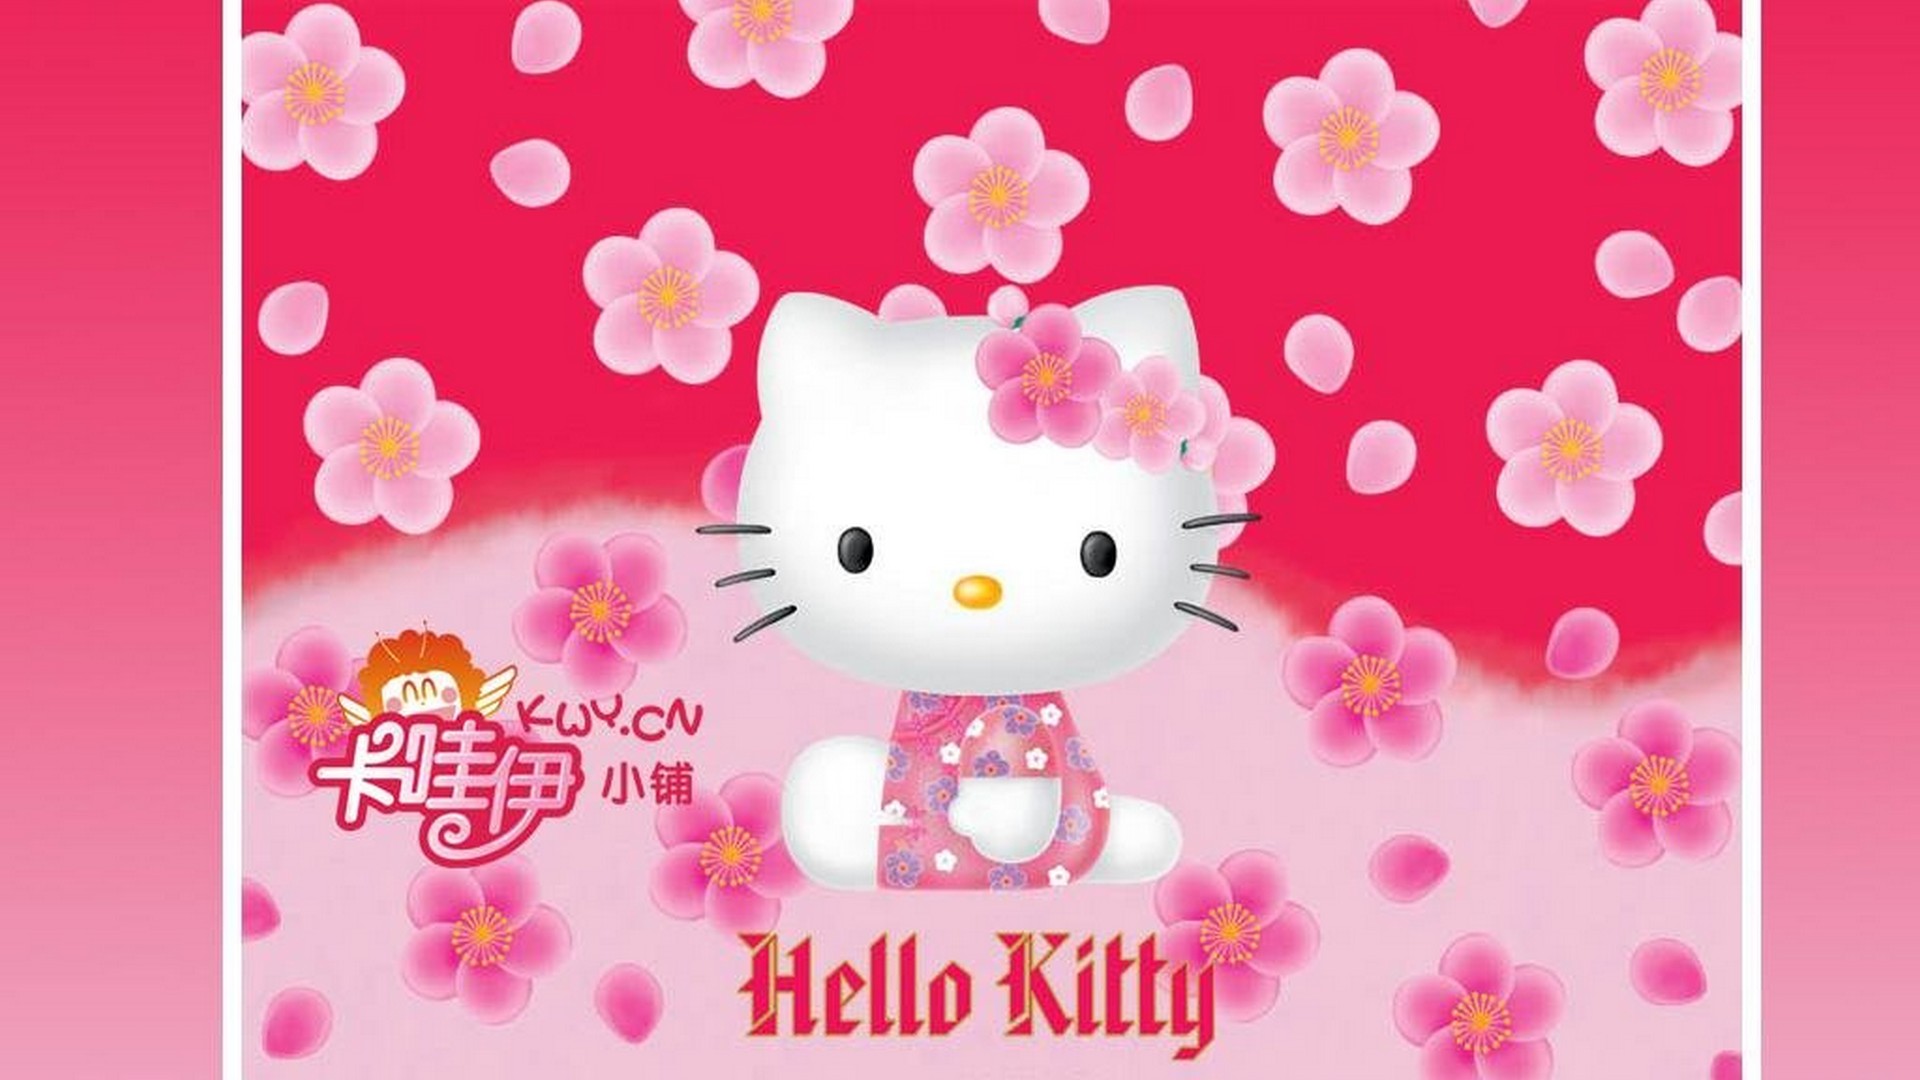 Desktop Wallpaper Hello Kitty Characters With Image - Cute Hello Kitty  Background Hd - 1920x1080 Wallpaper 